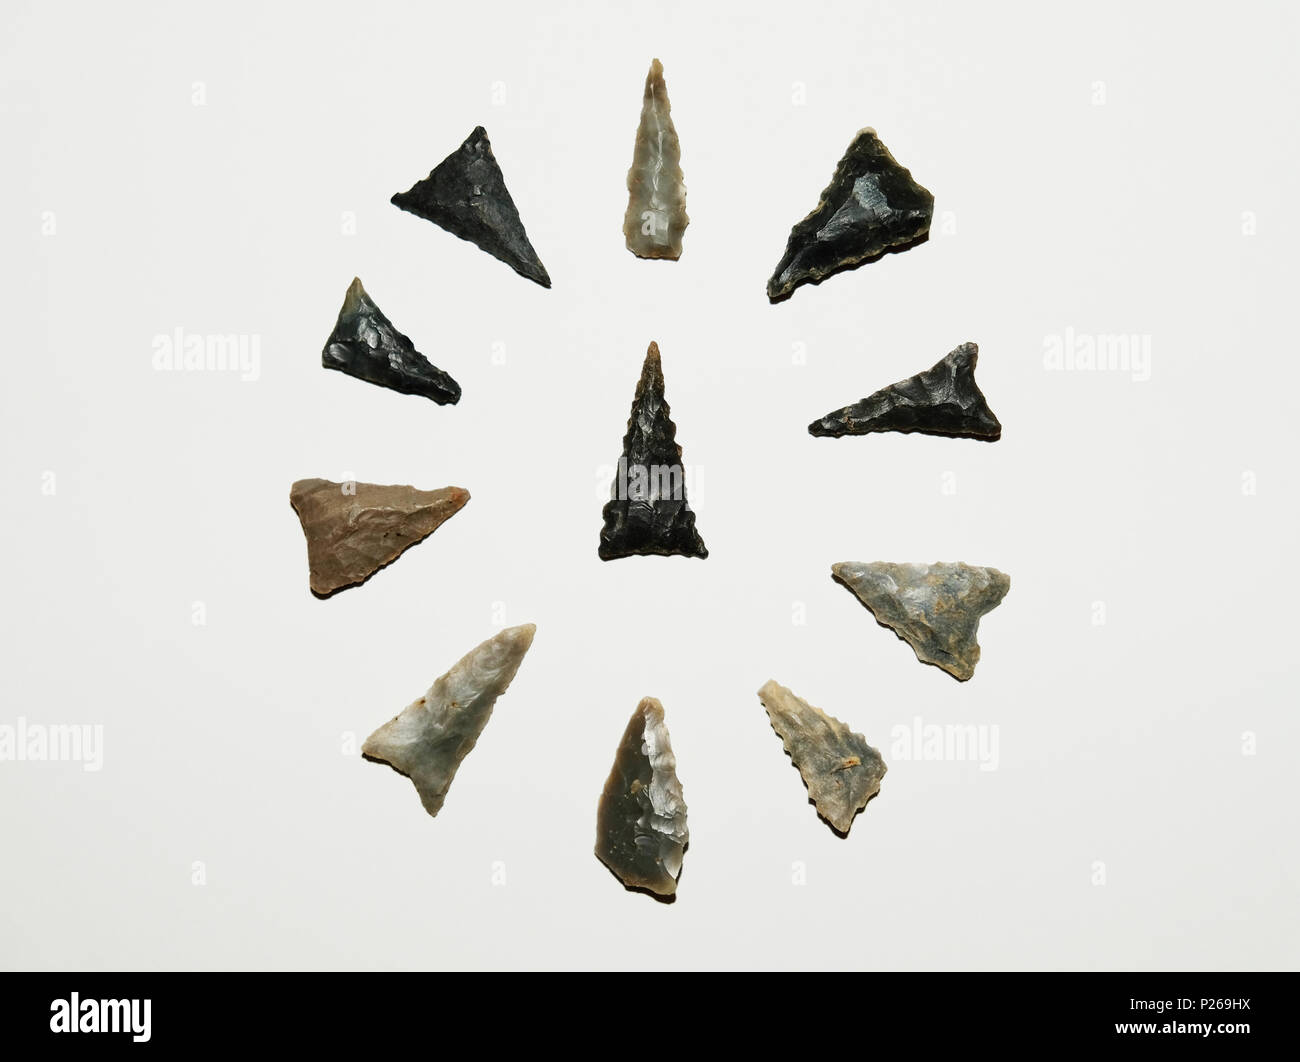 Native American artifacts - Hamilton triangles from the Woodland culture in the Tennessee Valley area - Found in Elk River watershed Stock Photo